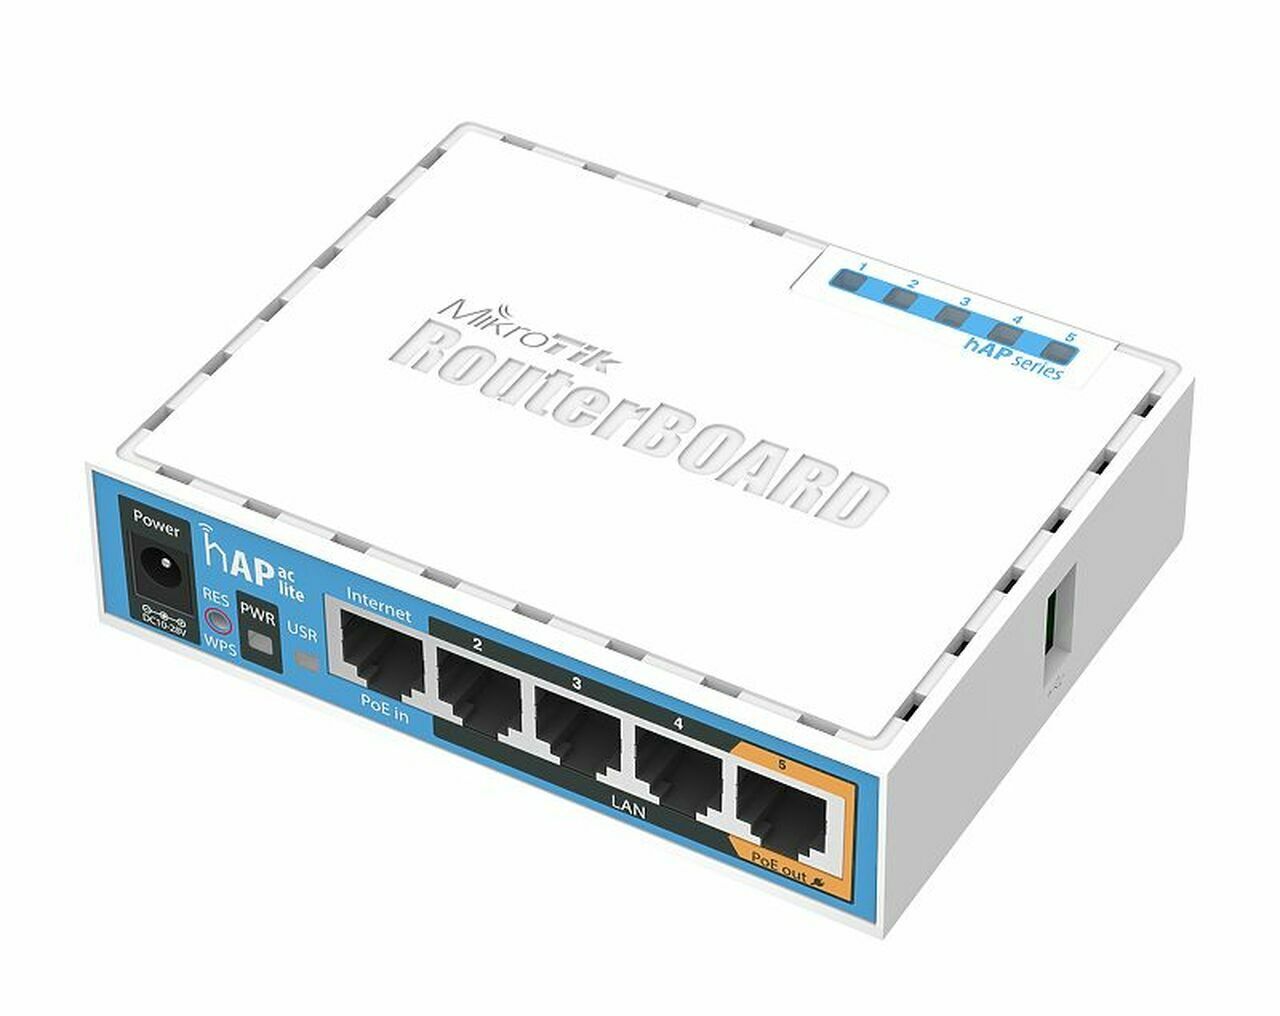 Mikrotik RB952Ui-5ac2nD RouterBOARD hAP ac 5GHz 802.11ac Dual Band INTL Version